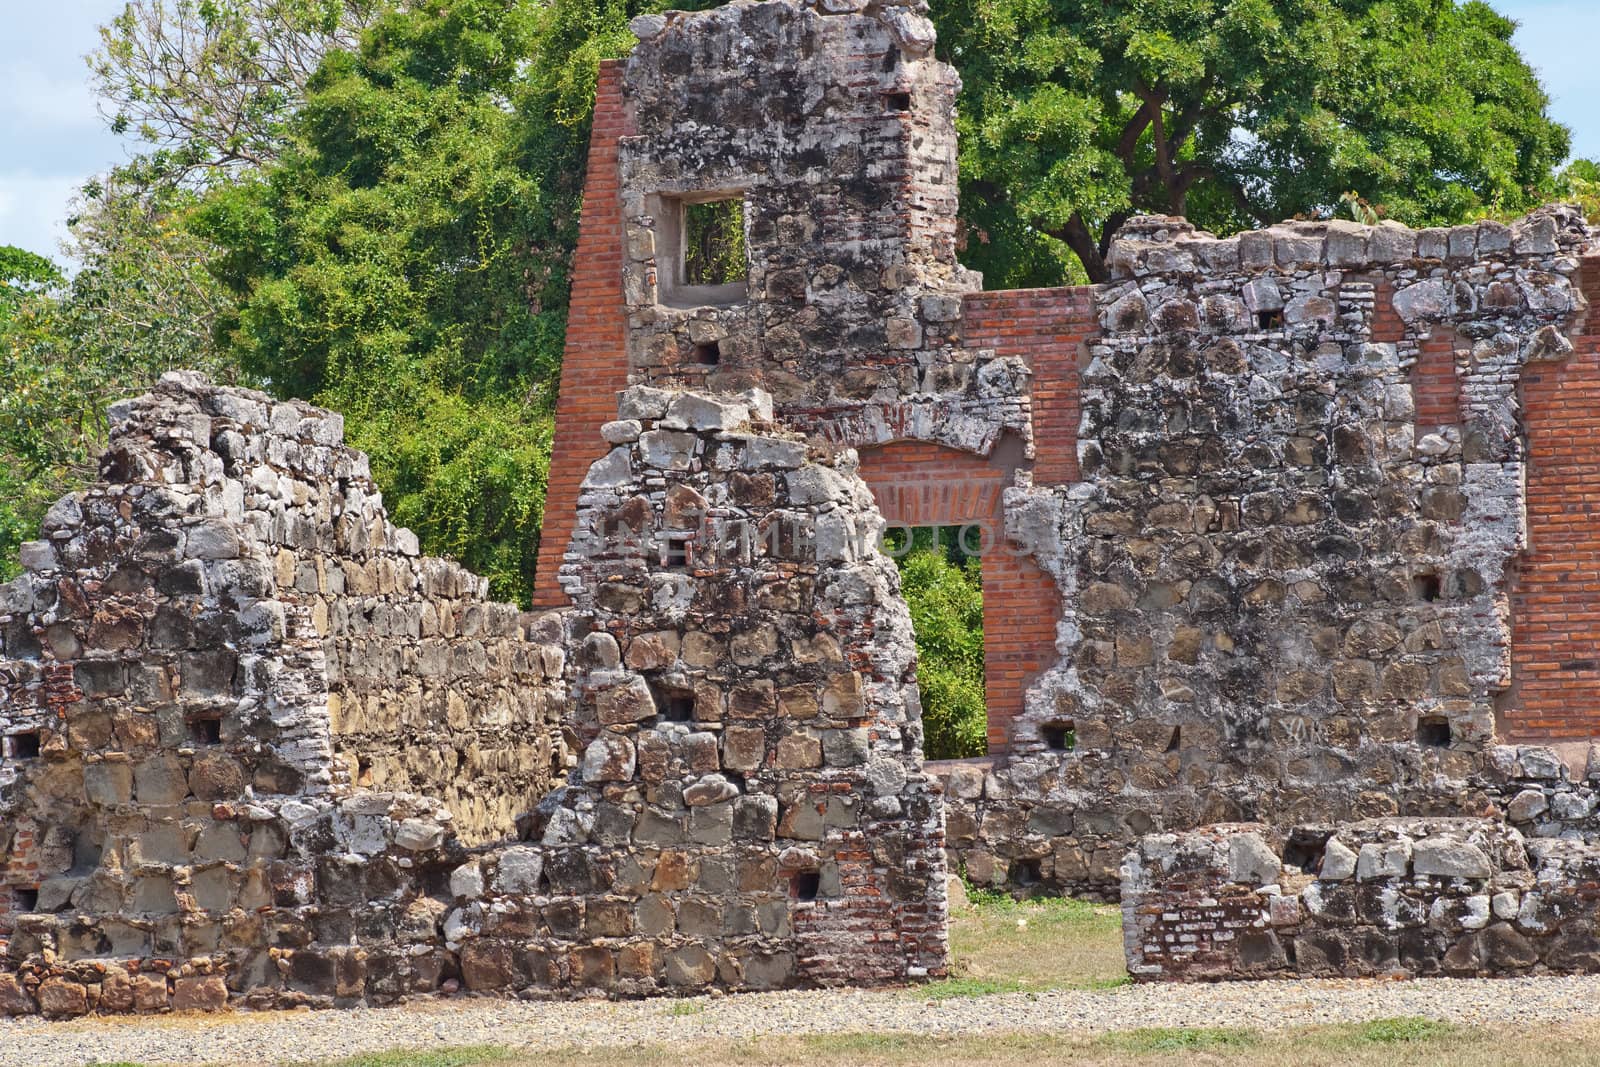 Old Ransacked buildings from the 1500s still stand in Panama City today.